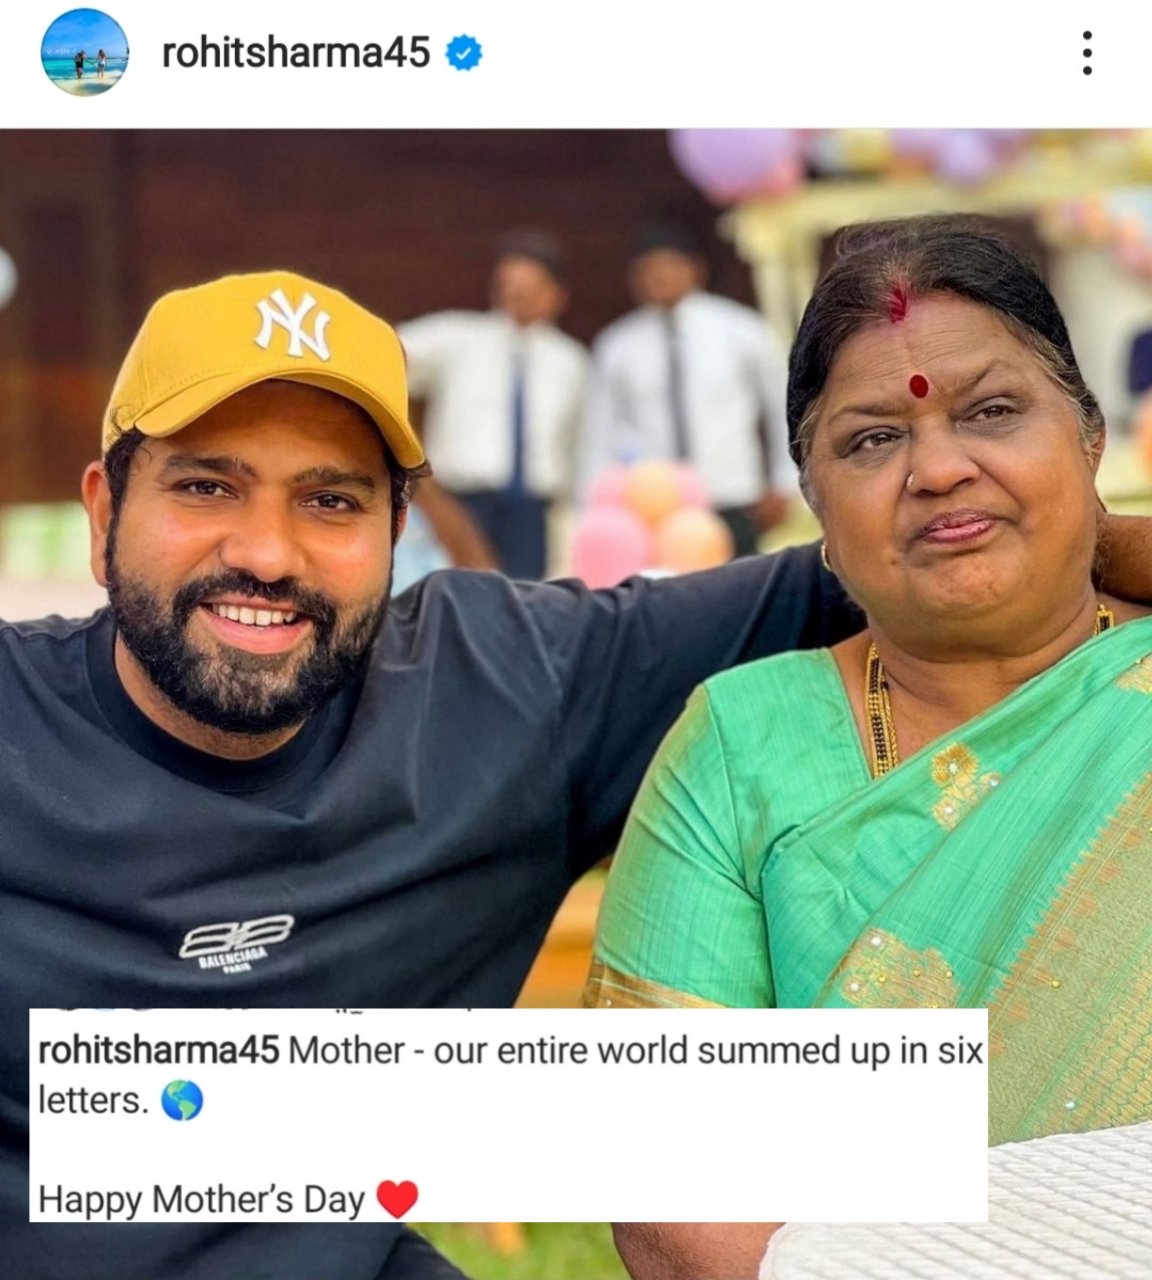 Nisha  on X: "Mother - our entire world summed up in six letters 🌍💙  Latest Instagram post of Captain Rohit Sharma ❤️ https://t.co/eBV6tjFEYO" /  X